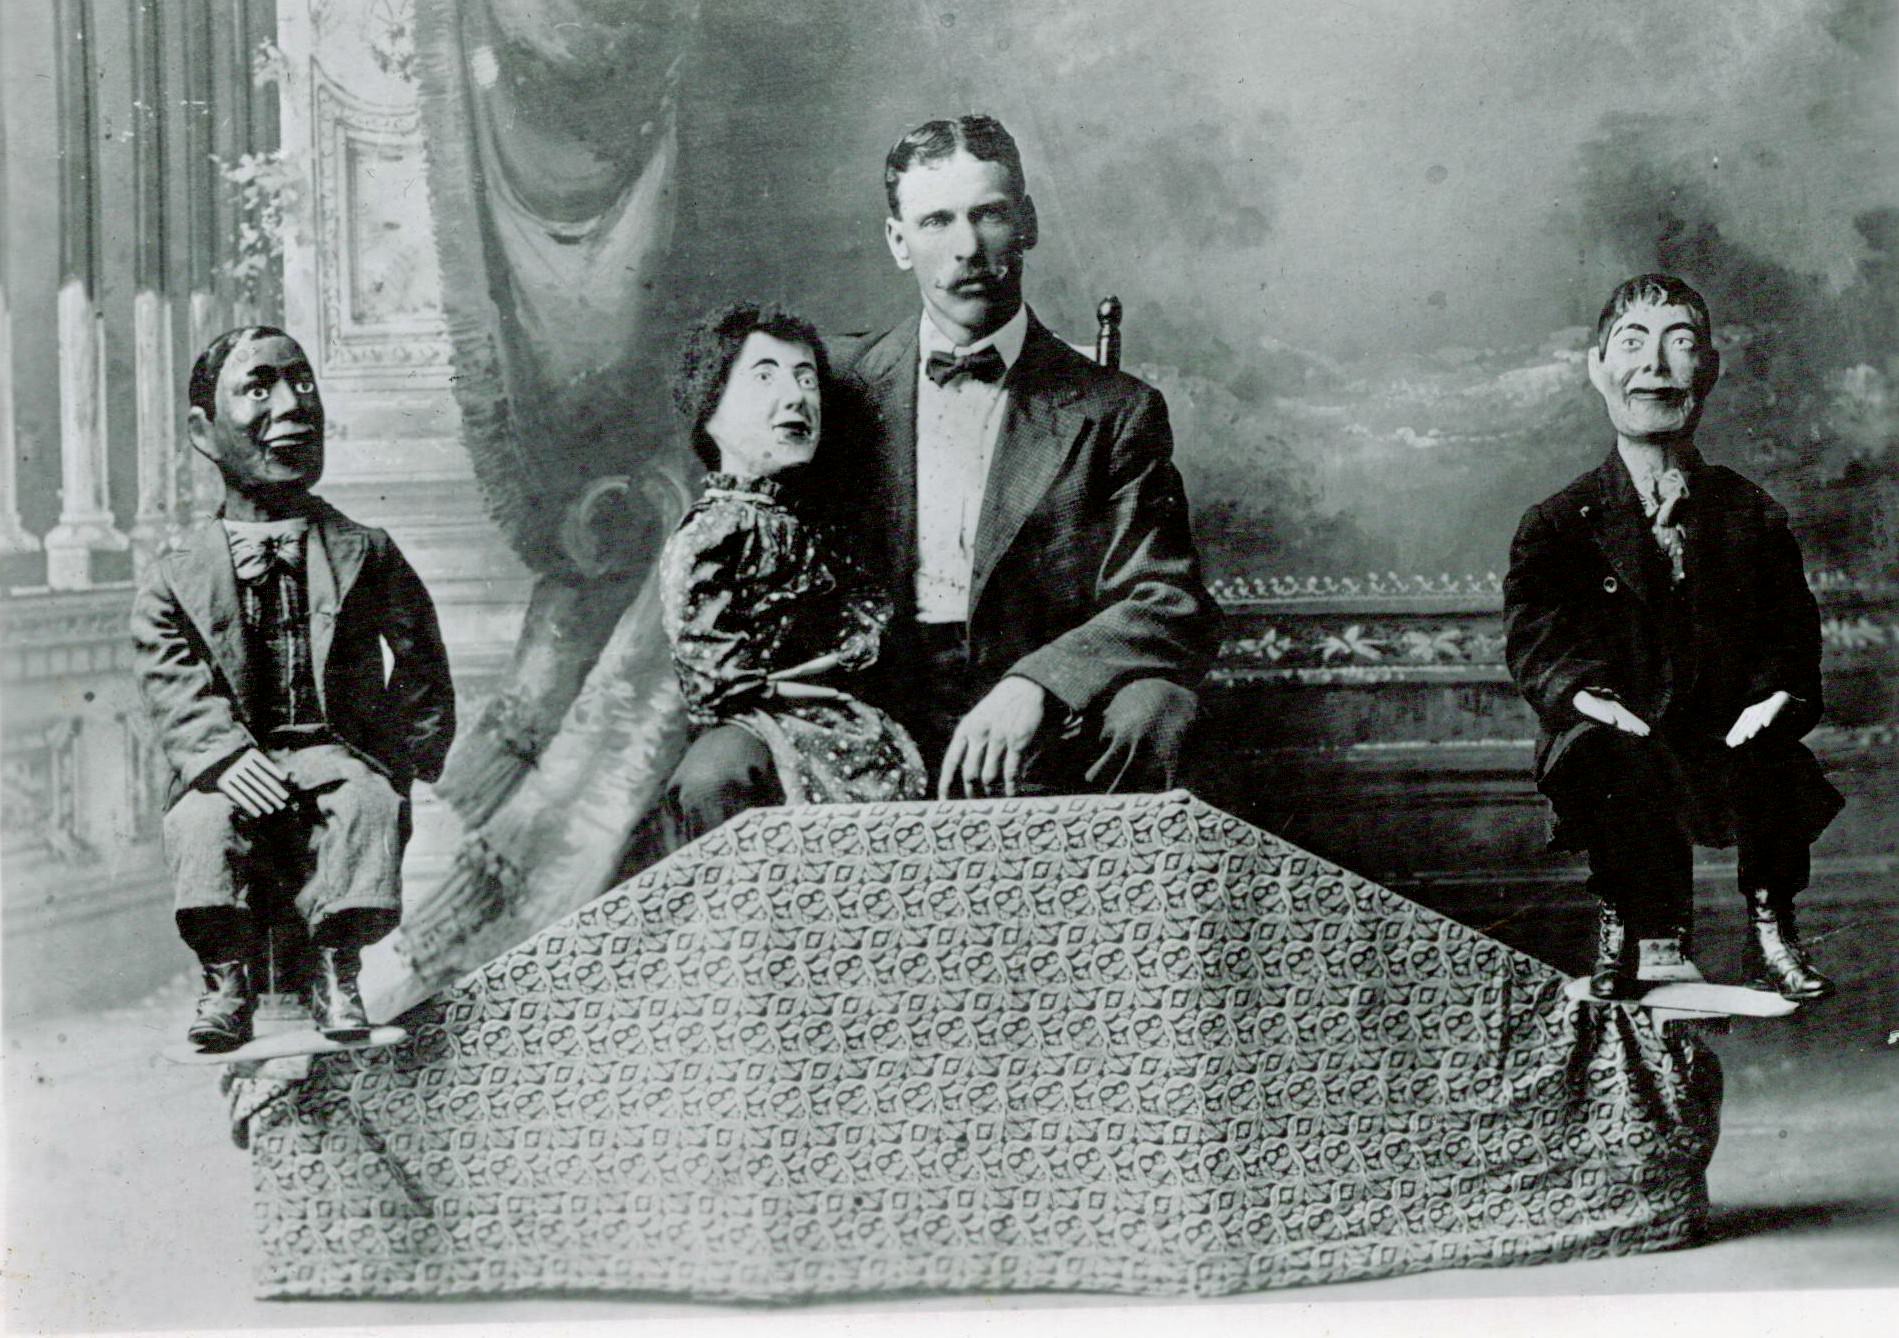 A man poses with his dummies in England in 1888.